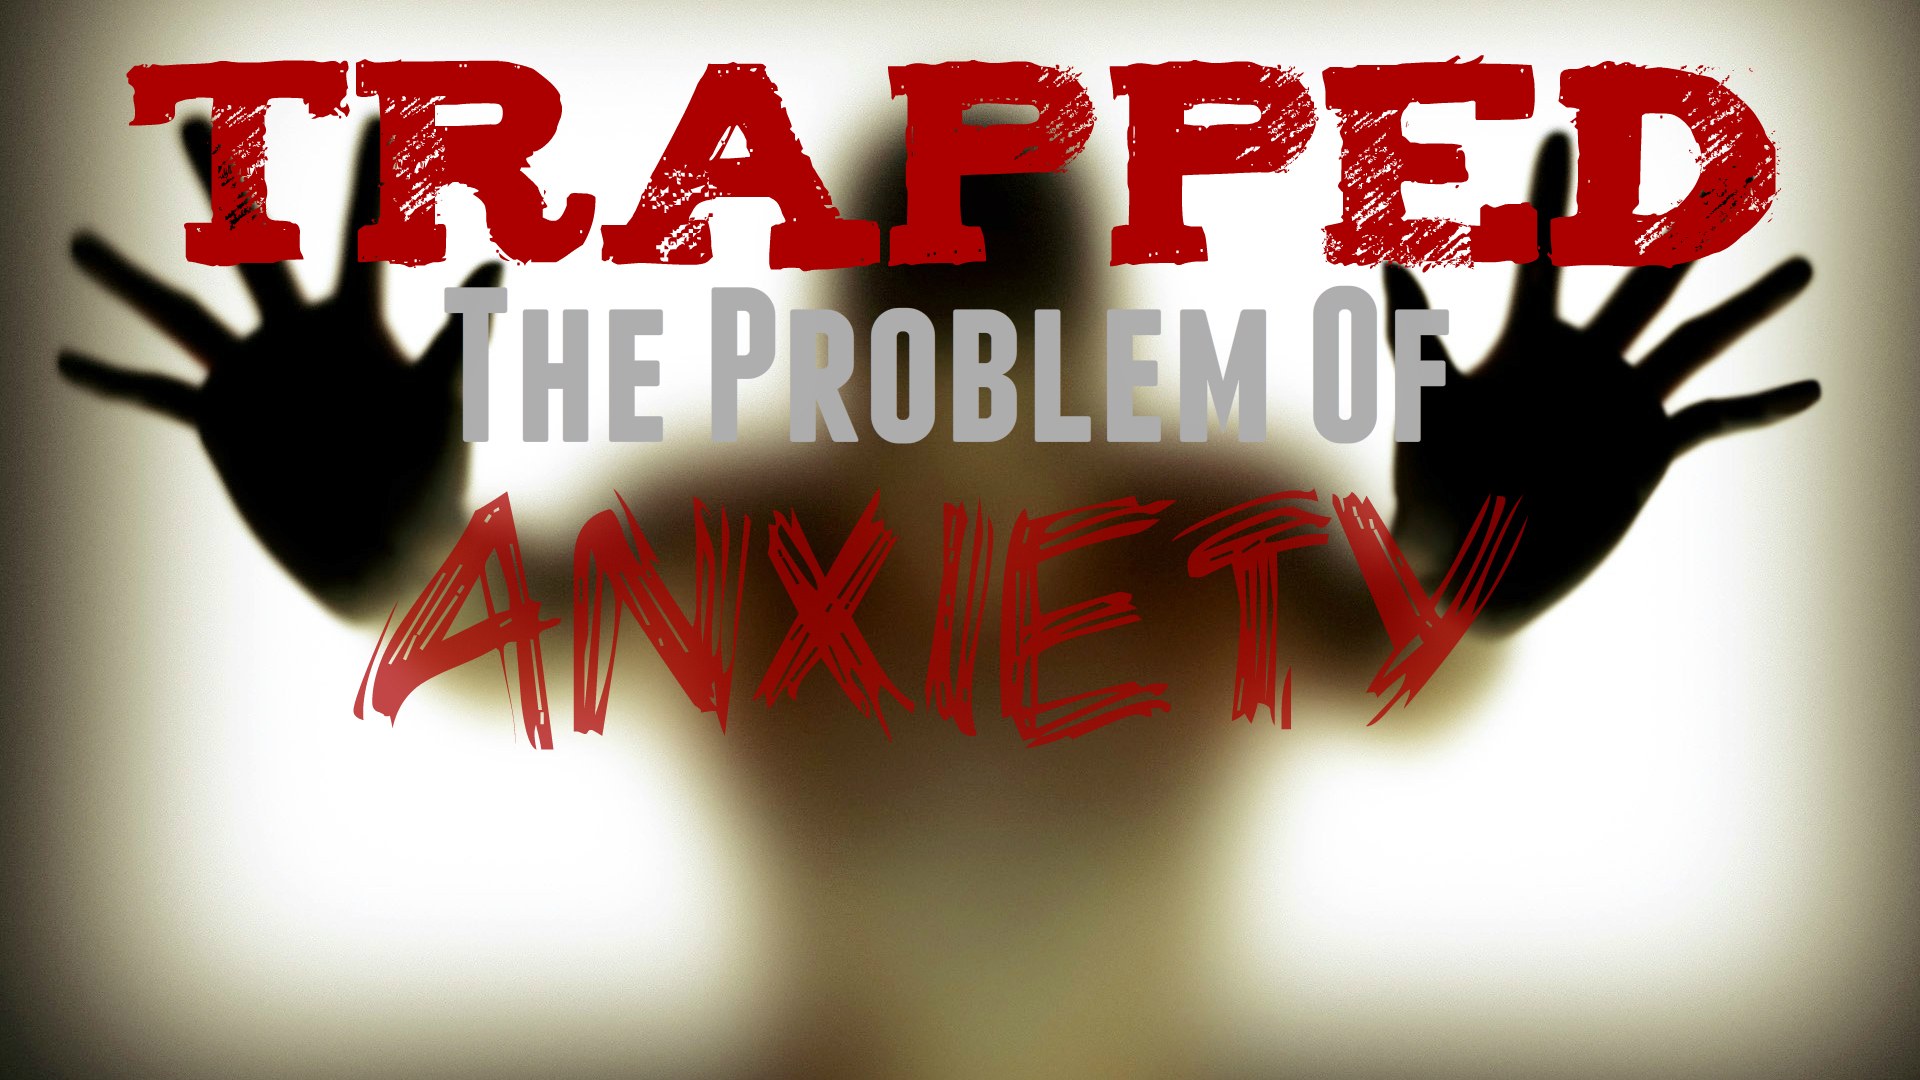 The Problem With Anxiety June 14, 2015 PM